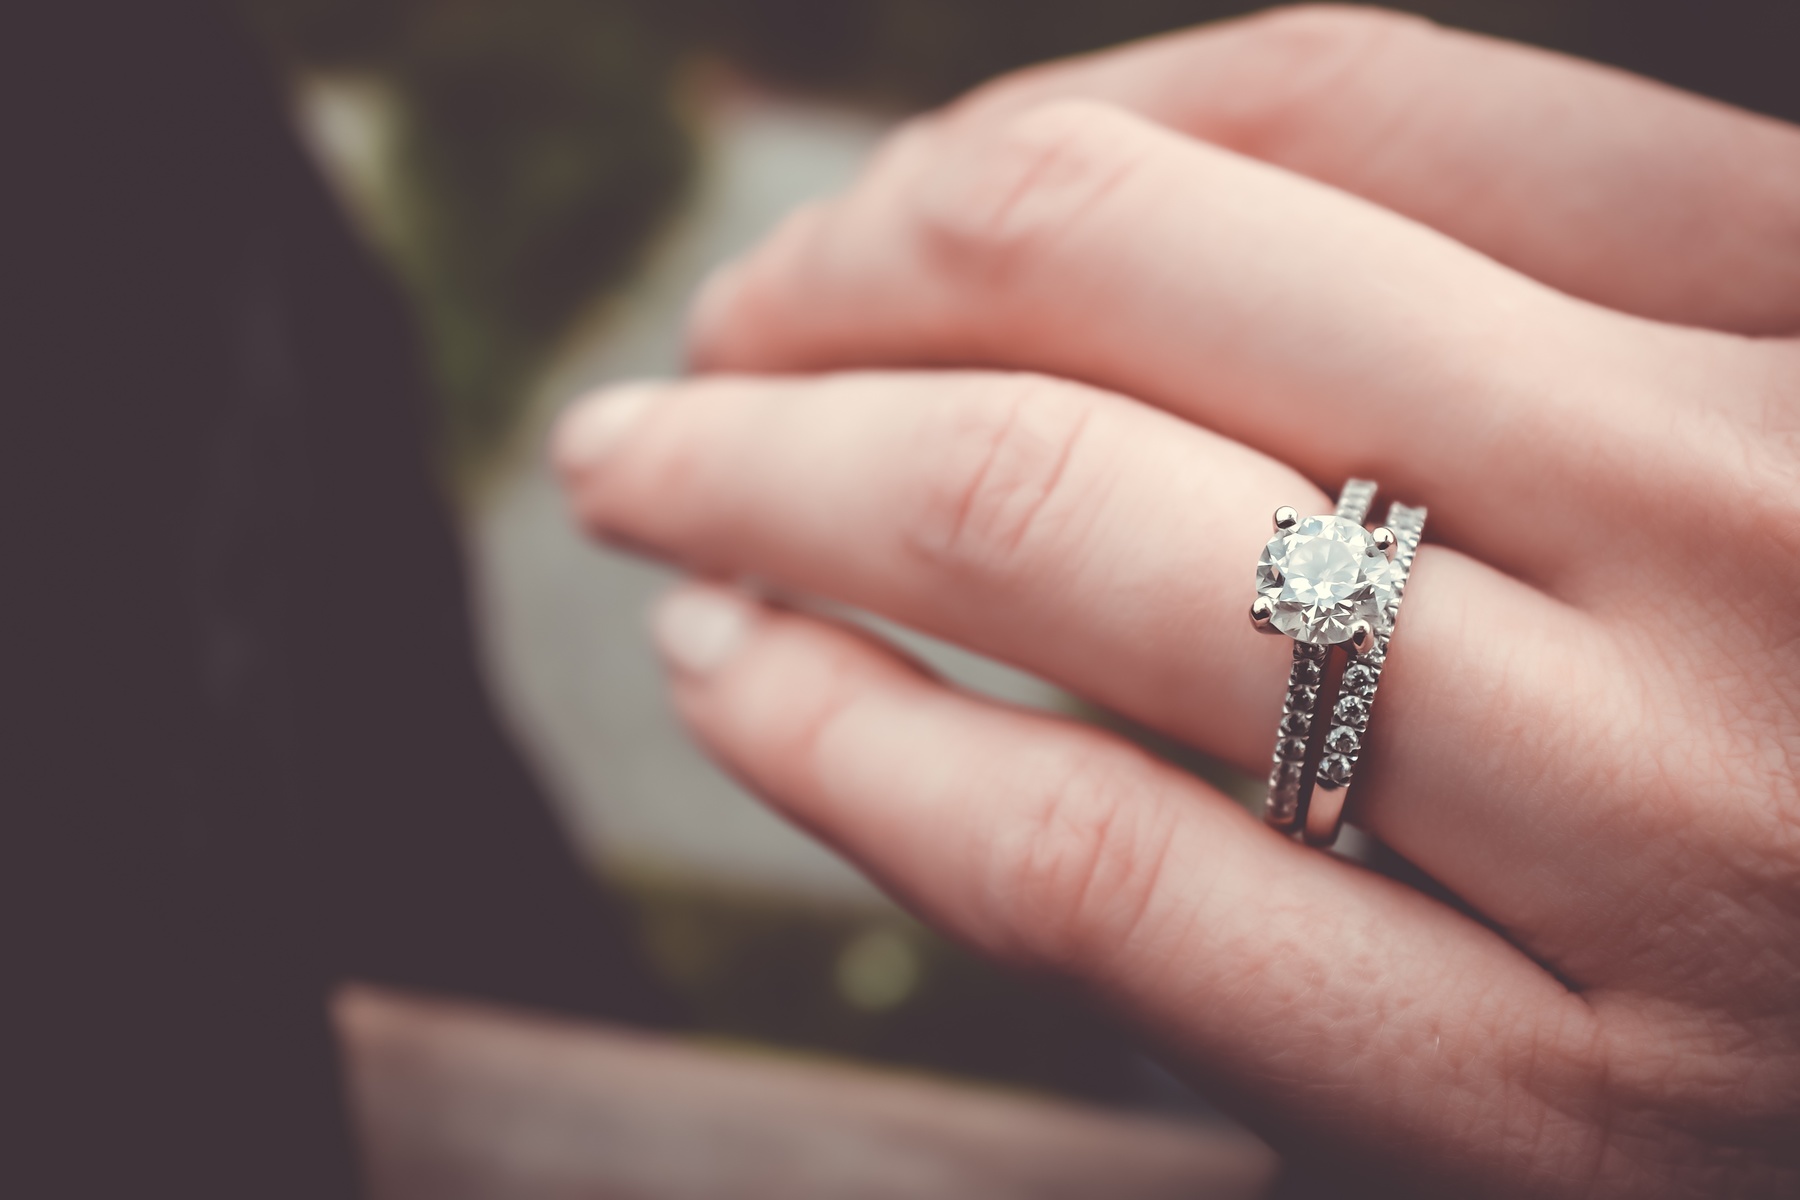 How Much Are UK Couples Spending On An Engagement Ring?